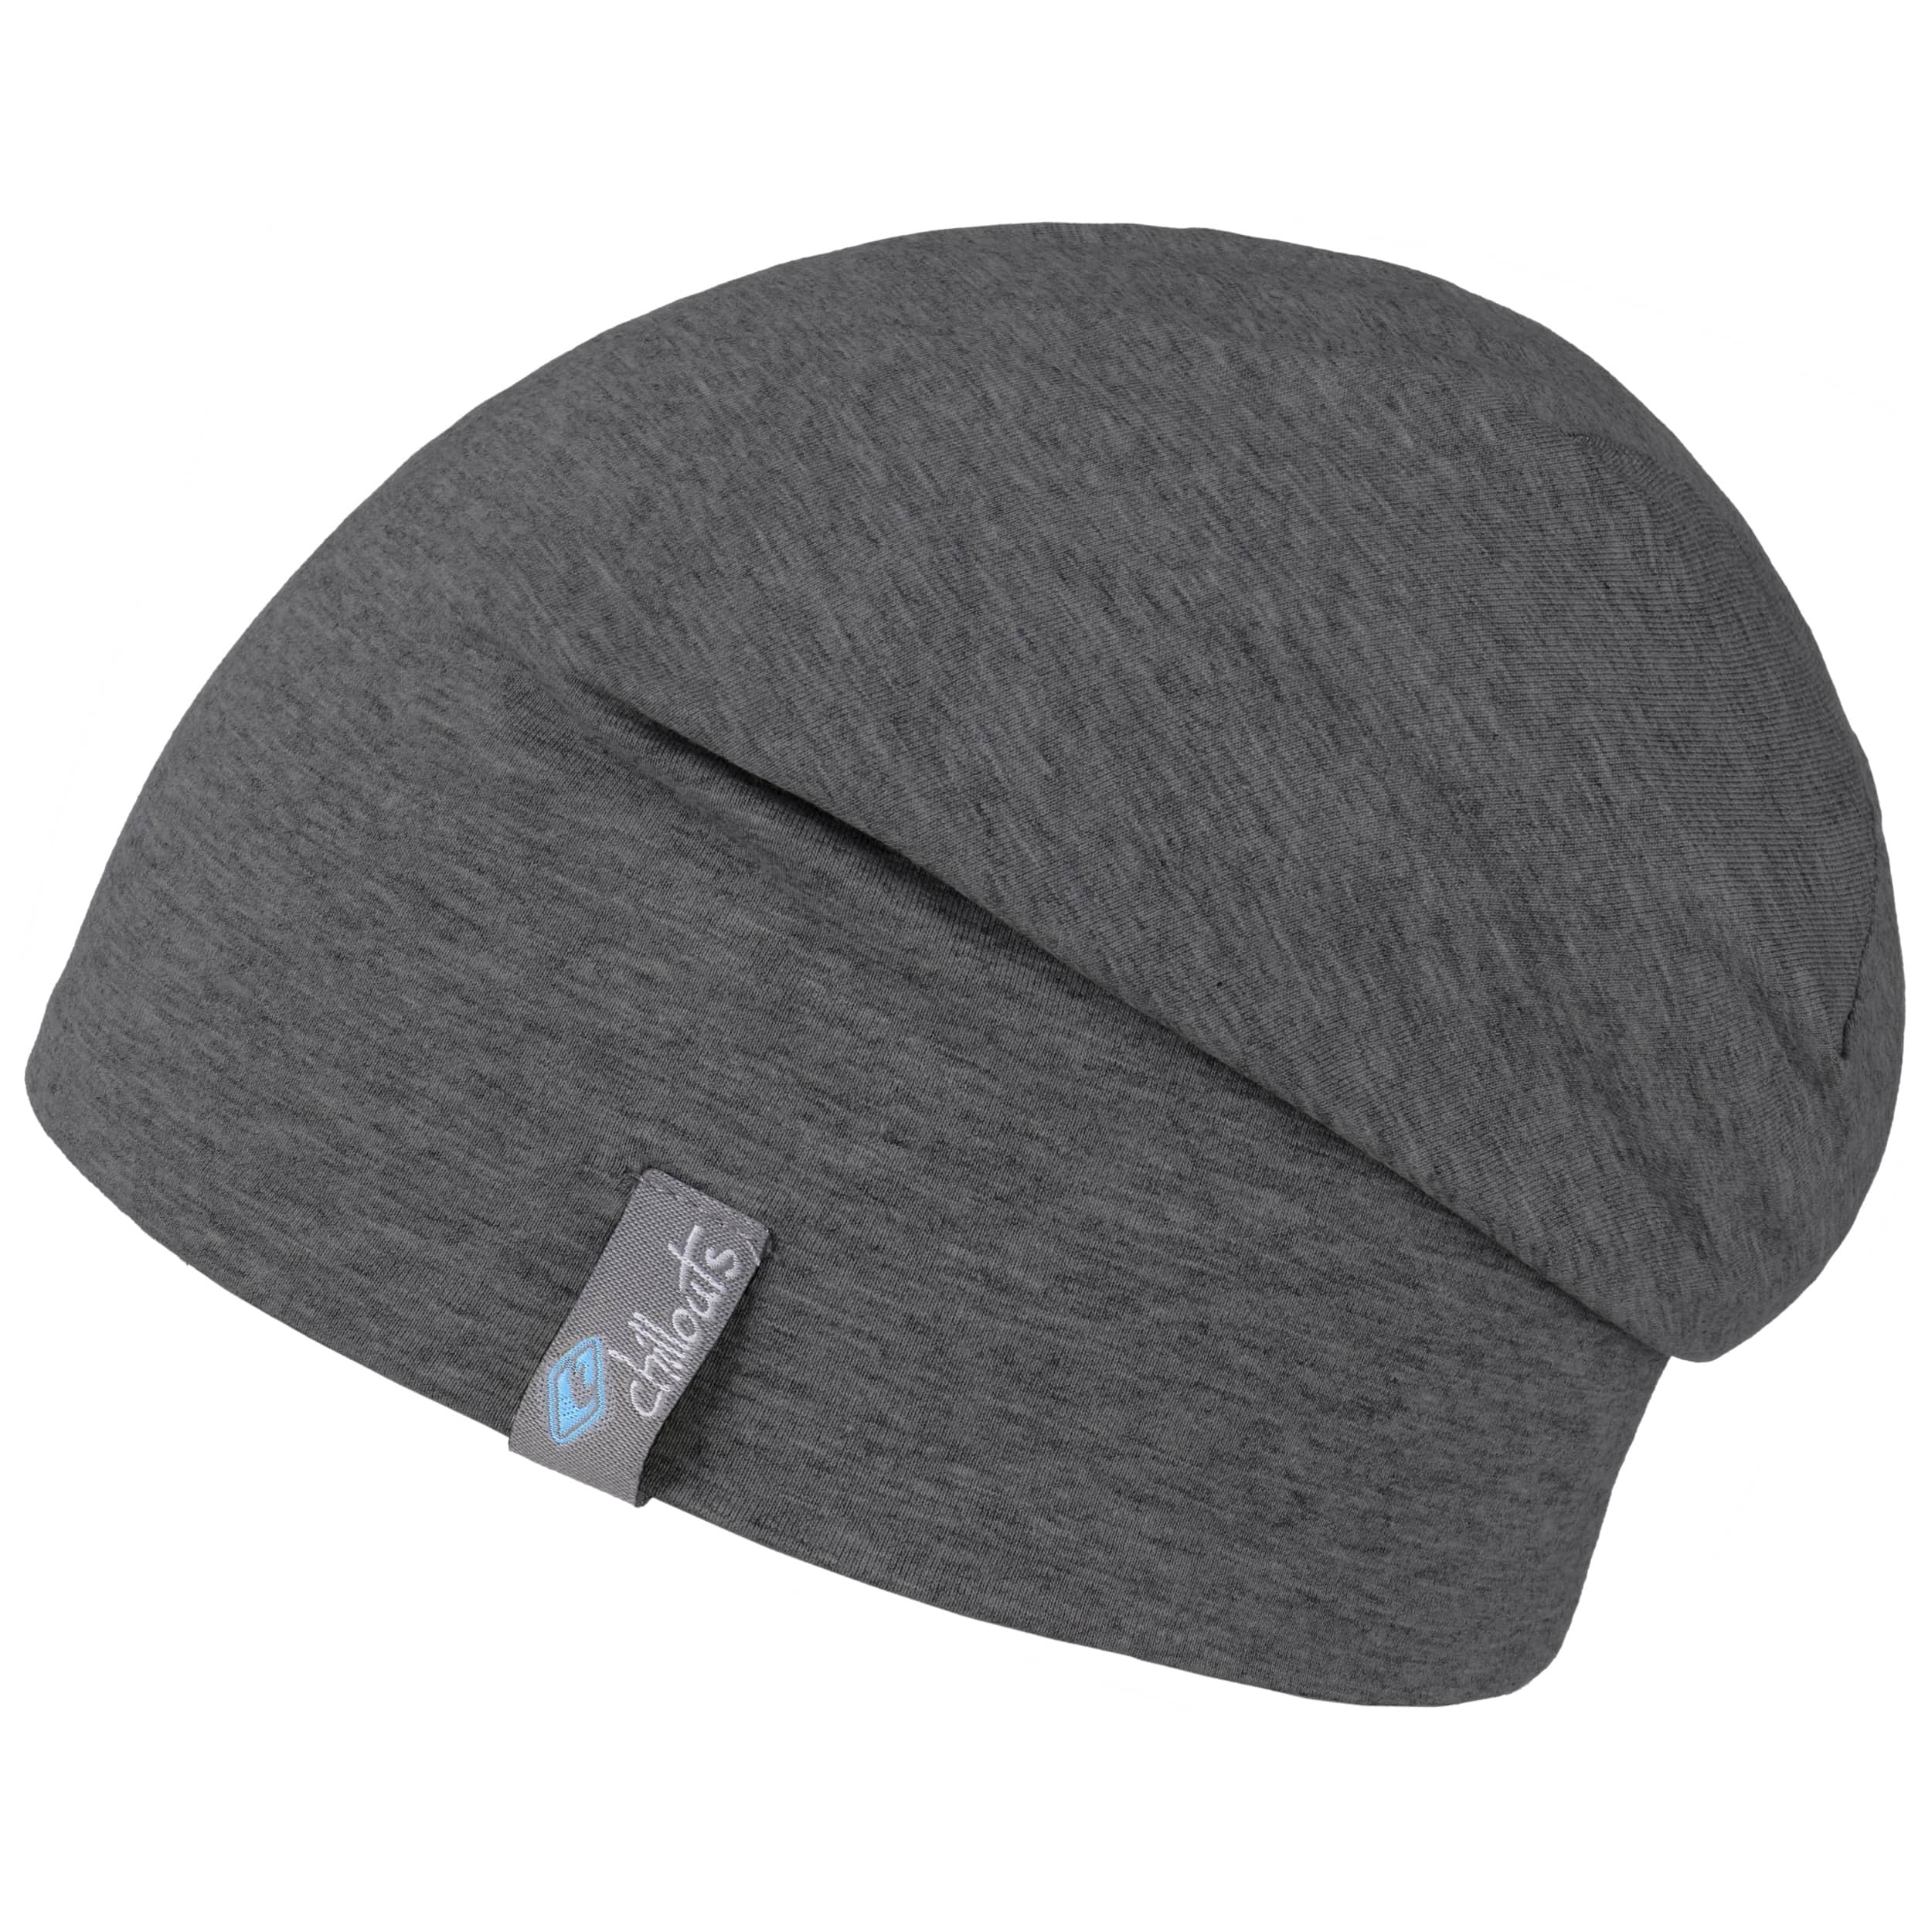 Oversize Hats, Hatshopping Chillouts ▷ --> Caps by Acapulco online Shop Beanies & Beanie